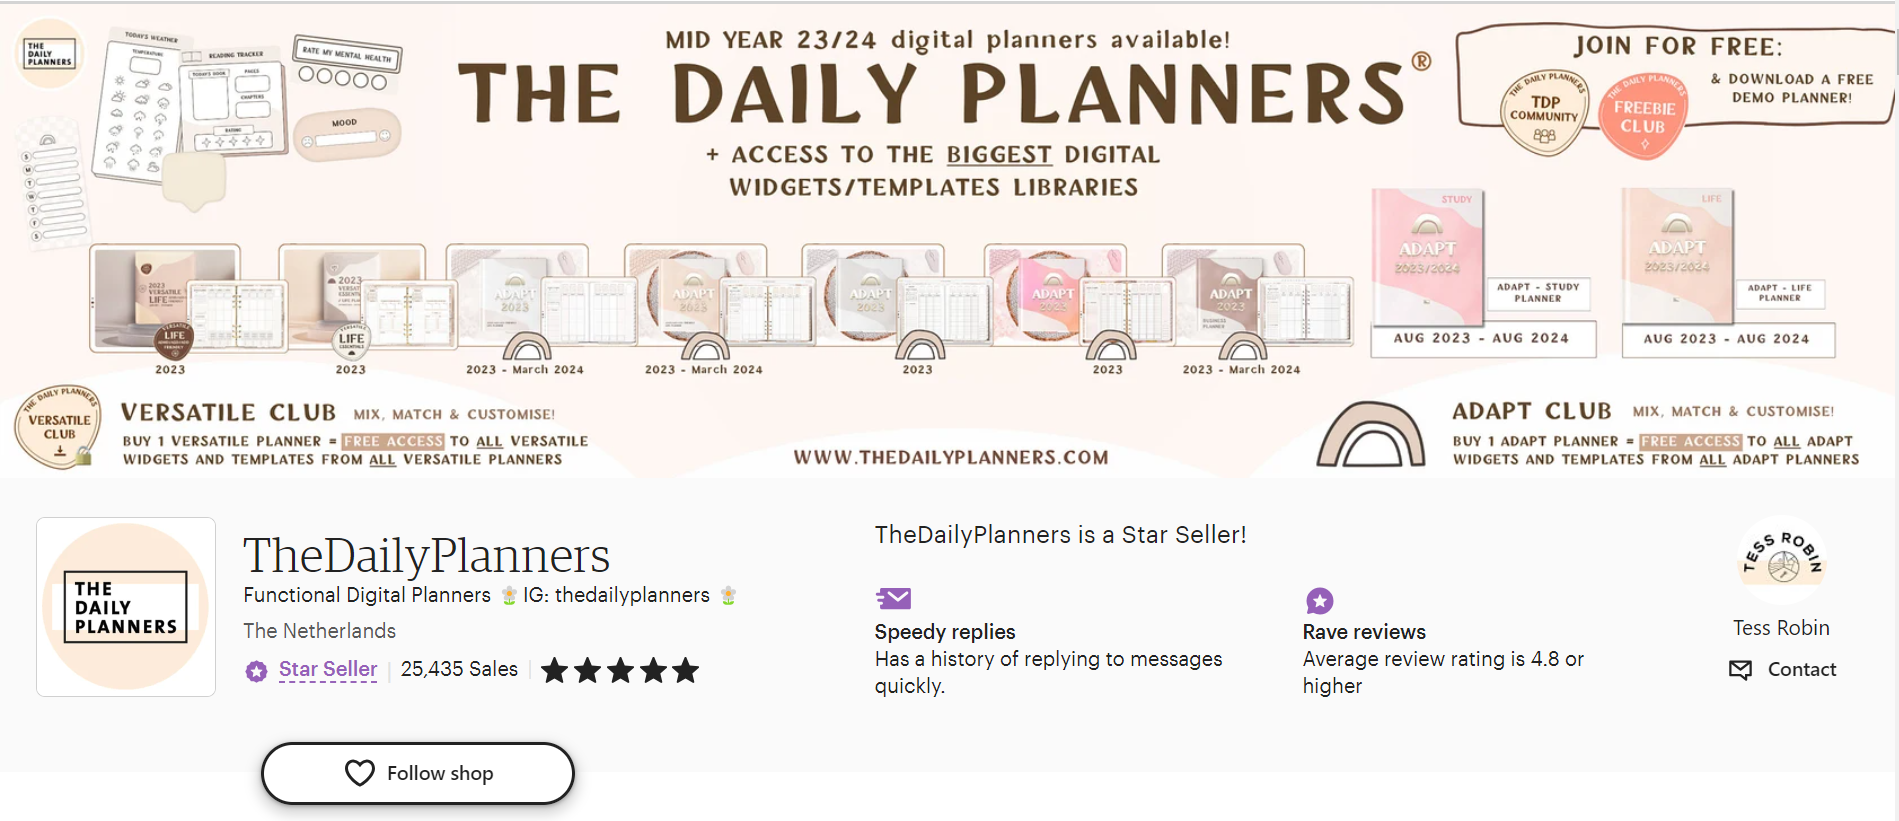 14 Best Online Planner Apps & Digital Planners | #6 TheDailyPlanners 